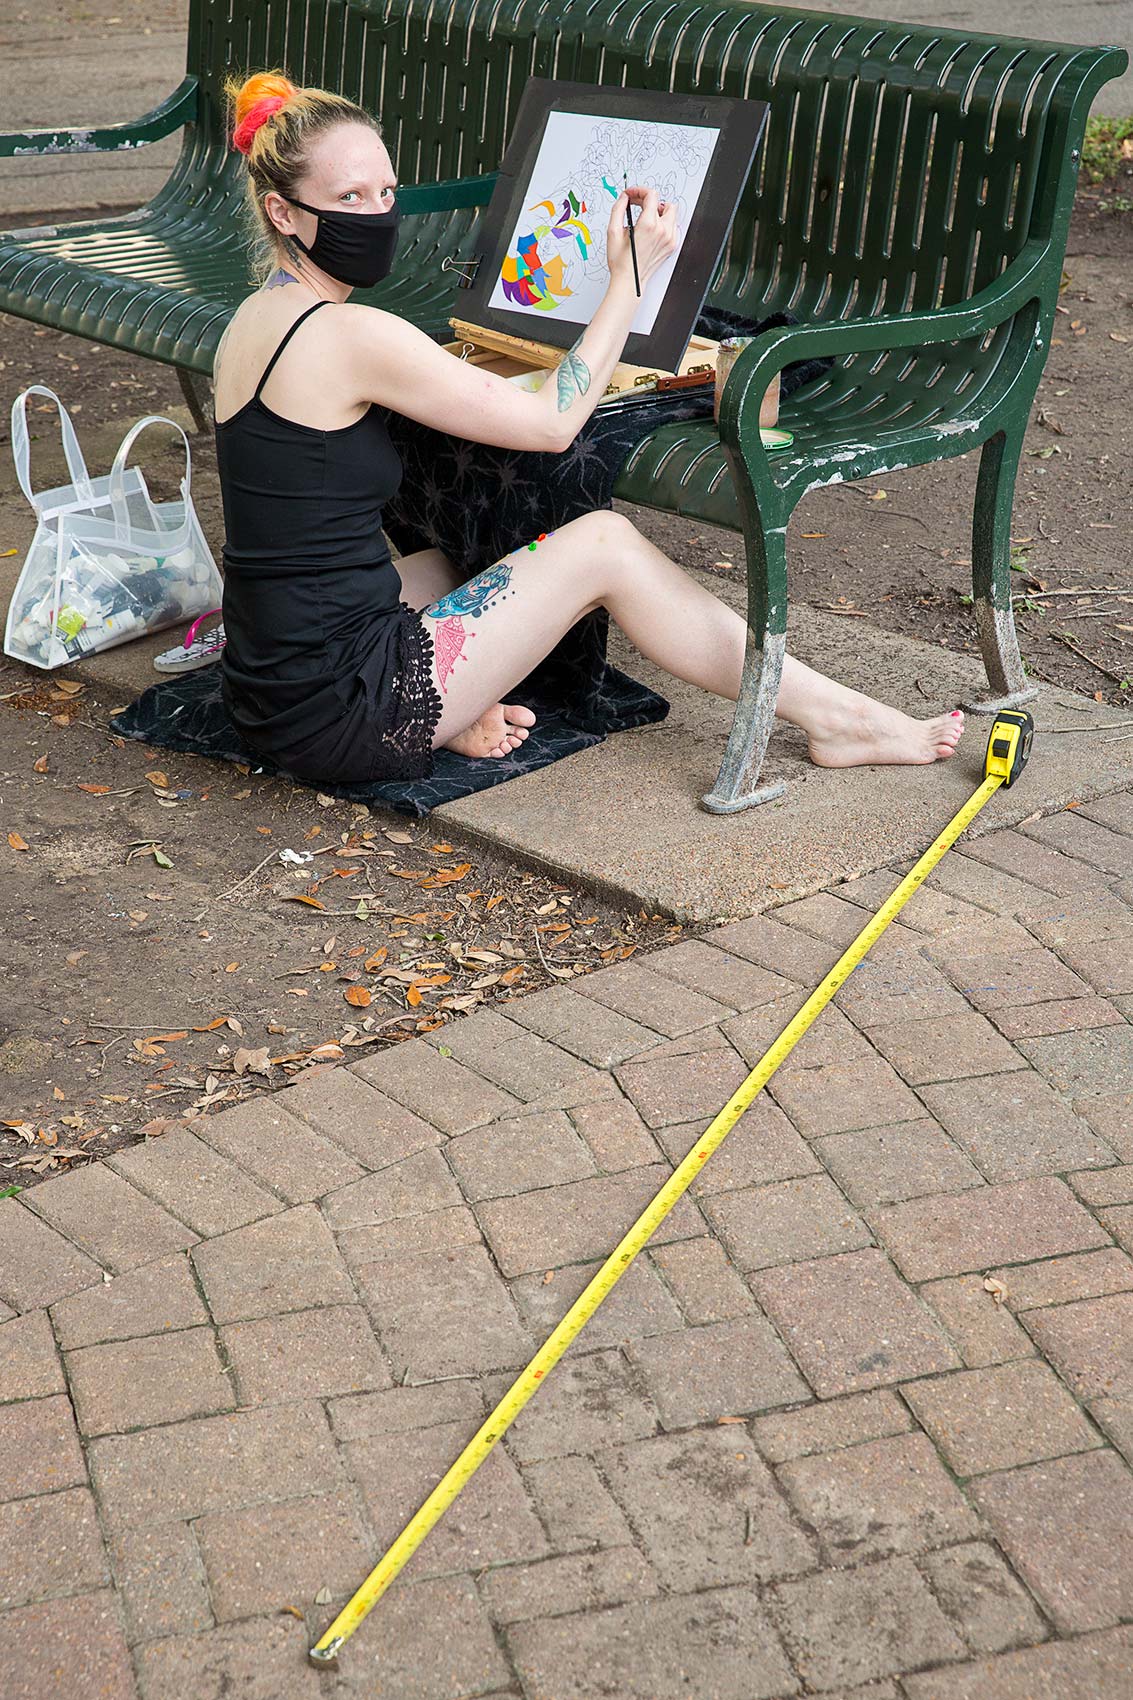 A young masked woman in a park paints on a canvas with a long tape measure as a symbol of Covid-19 social distance